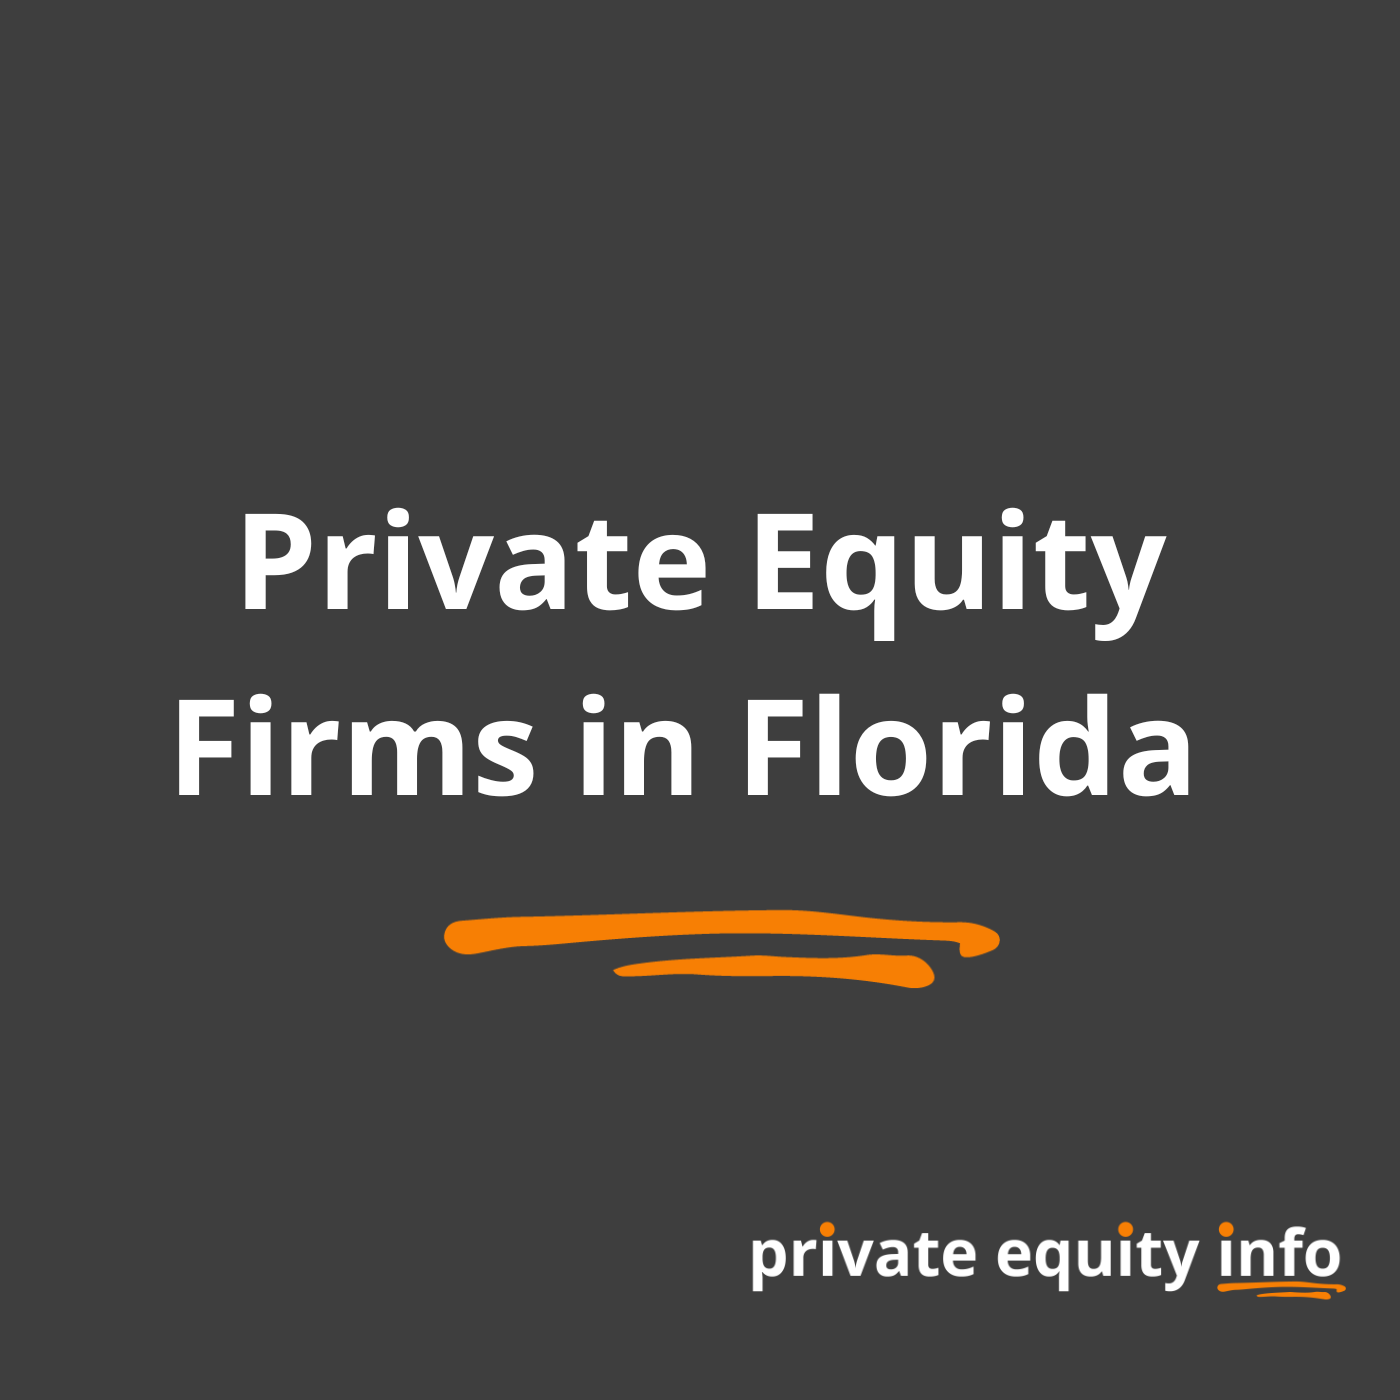 Private Equity Firms in Florida